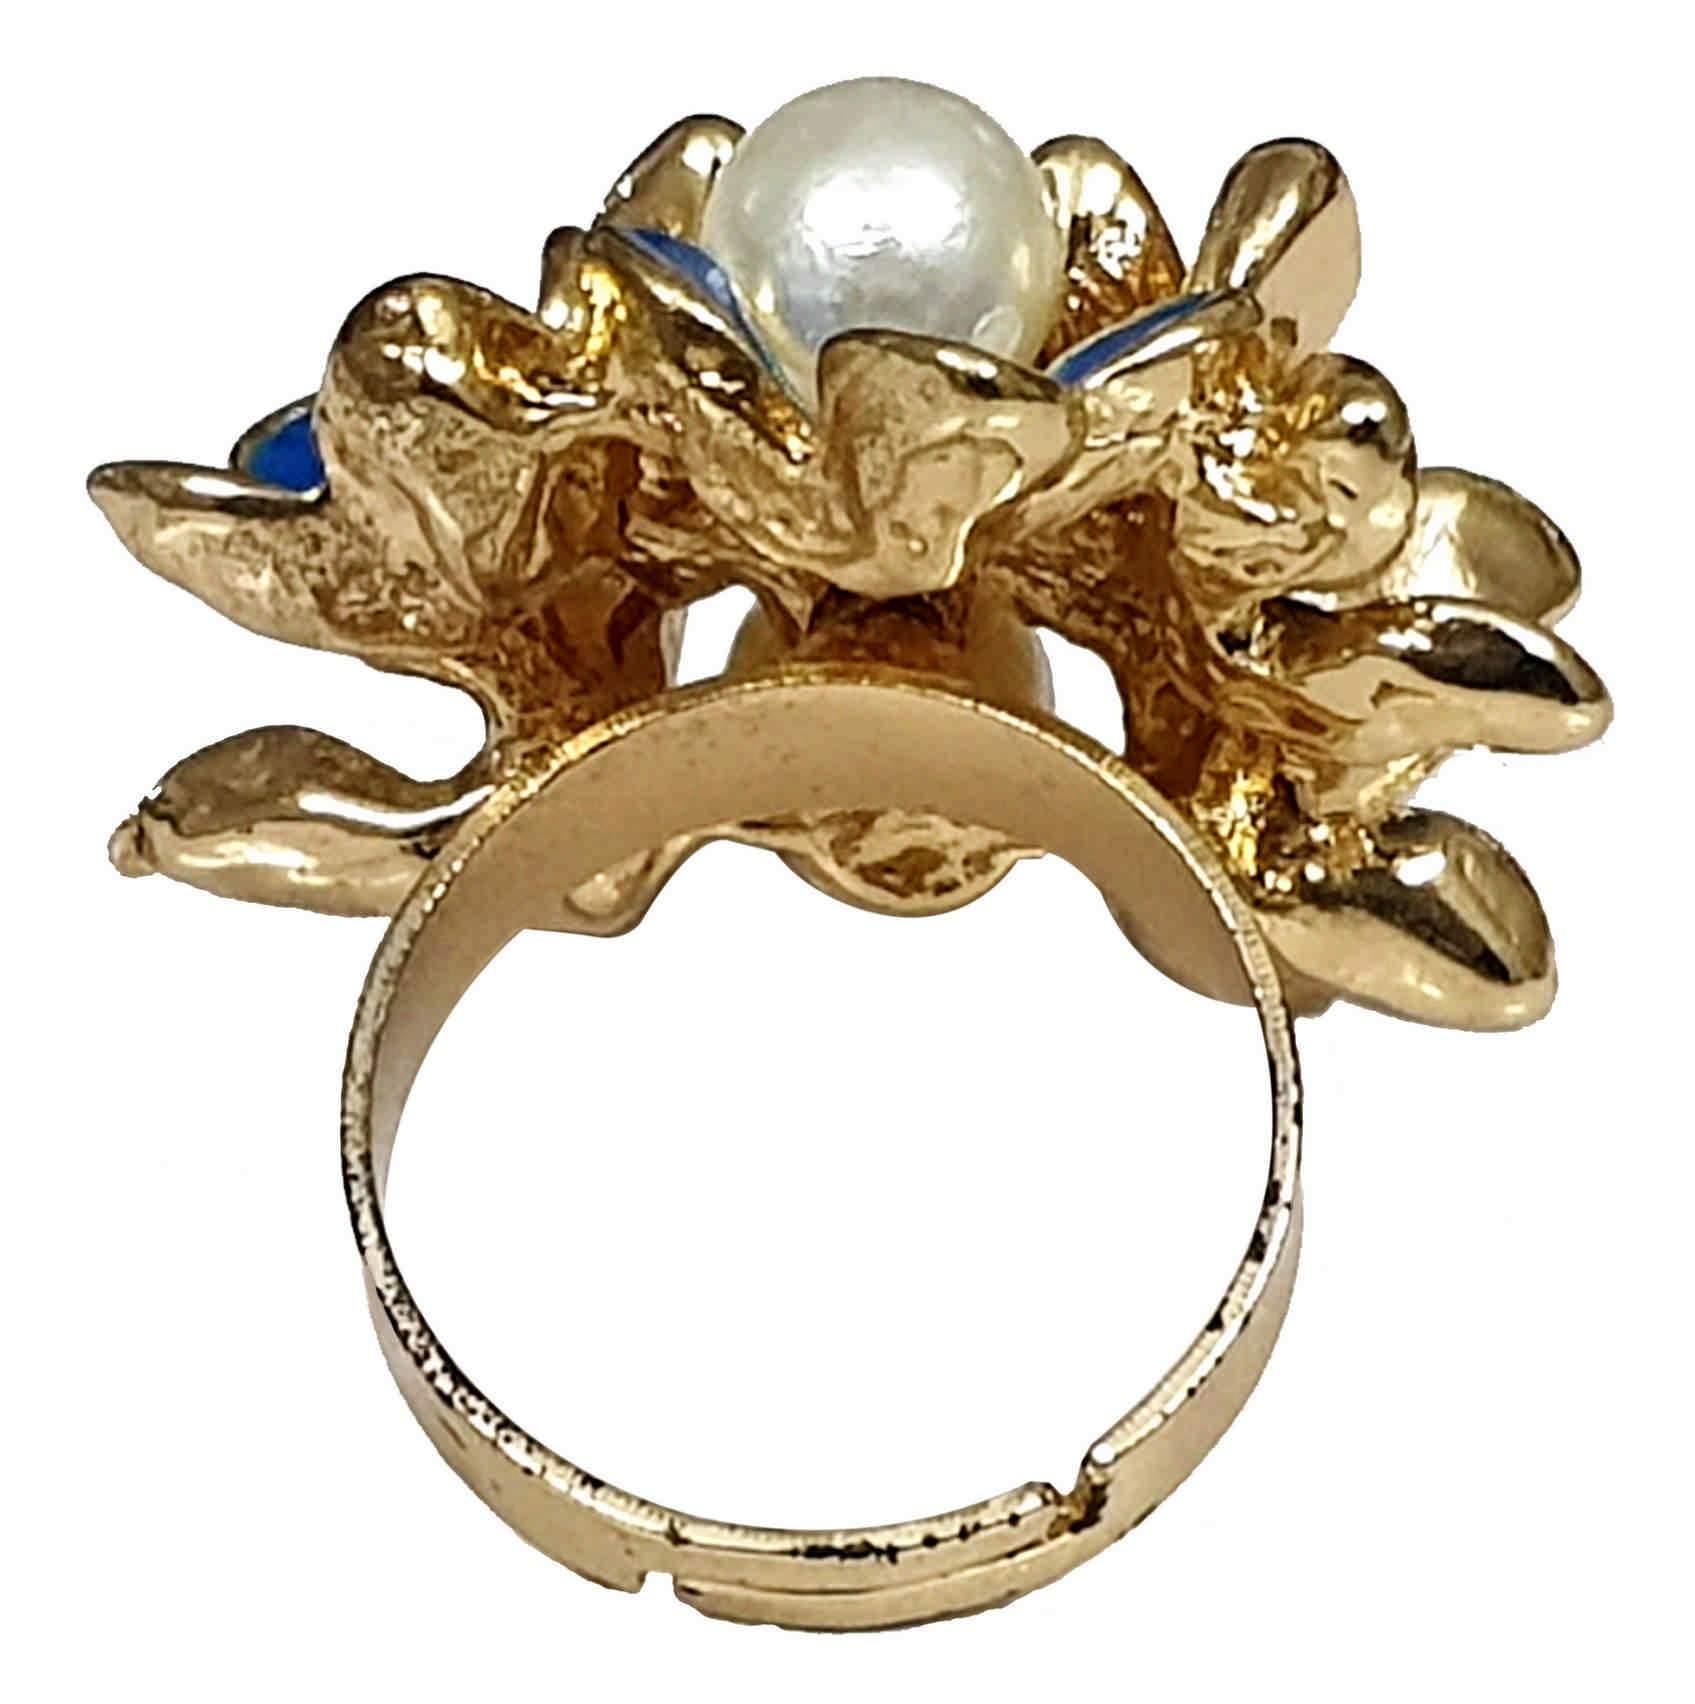 Indian Petals Rhinestones and Pearls Studded Floral Design Enamel Imitation Artificial Metal Polished Ring for Girls - Indian Petals